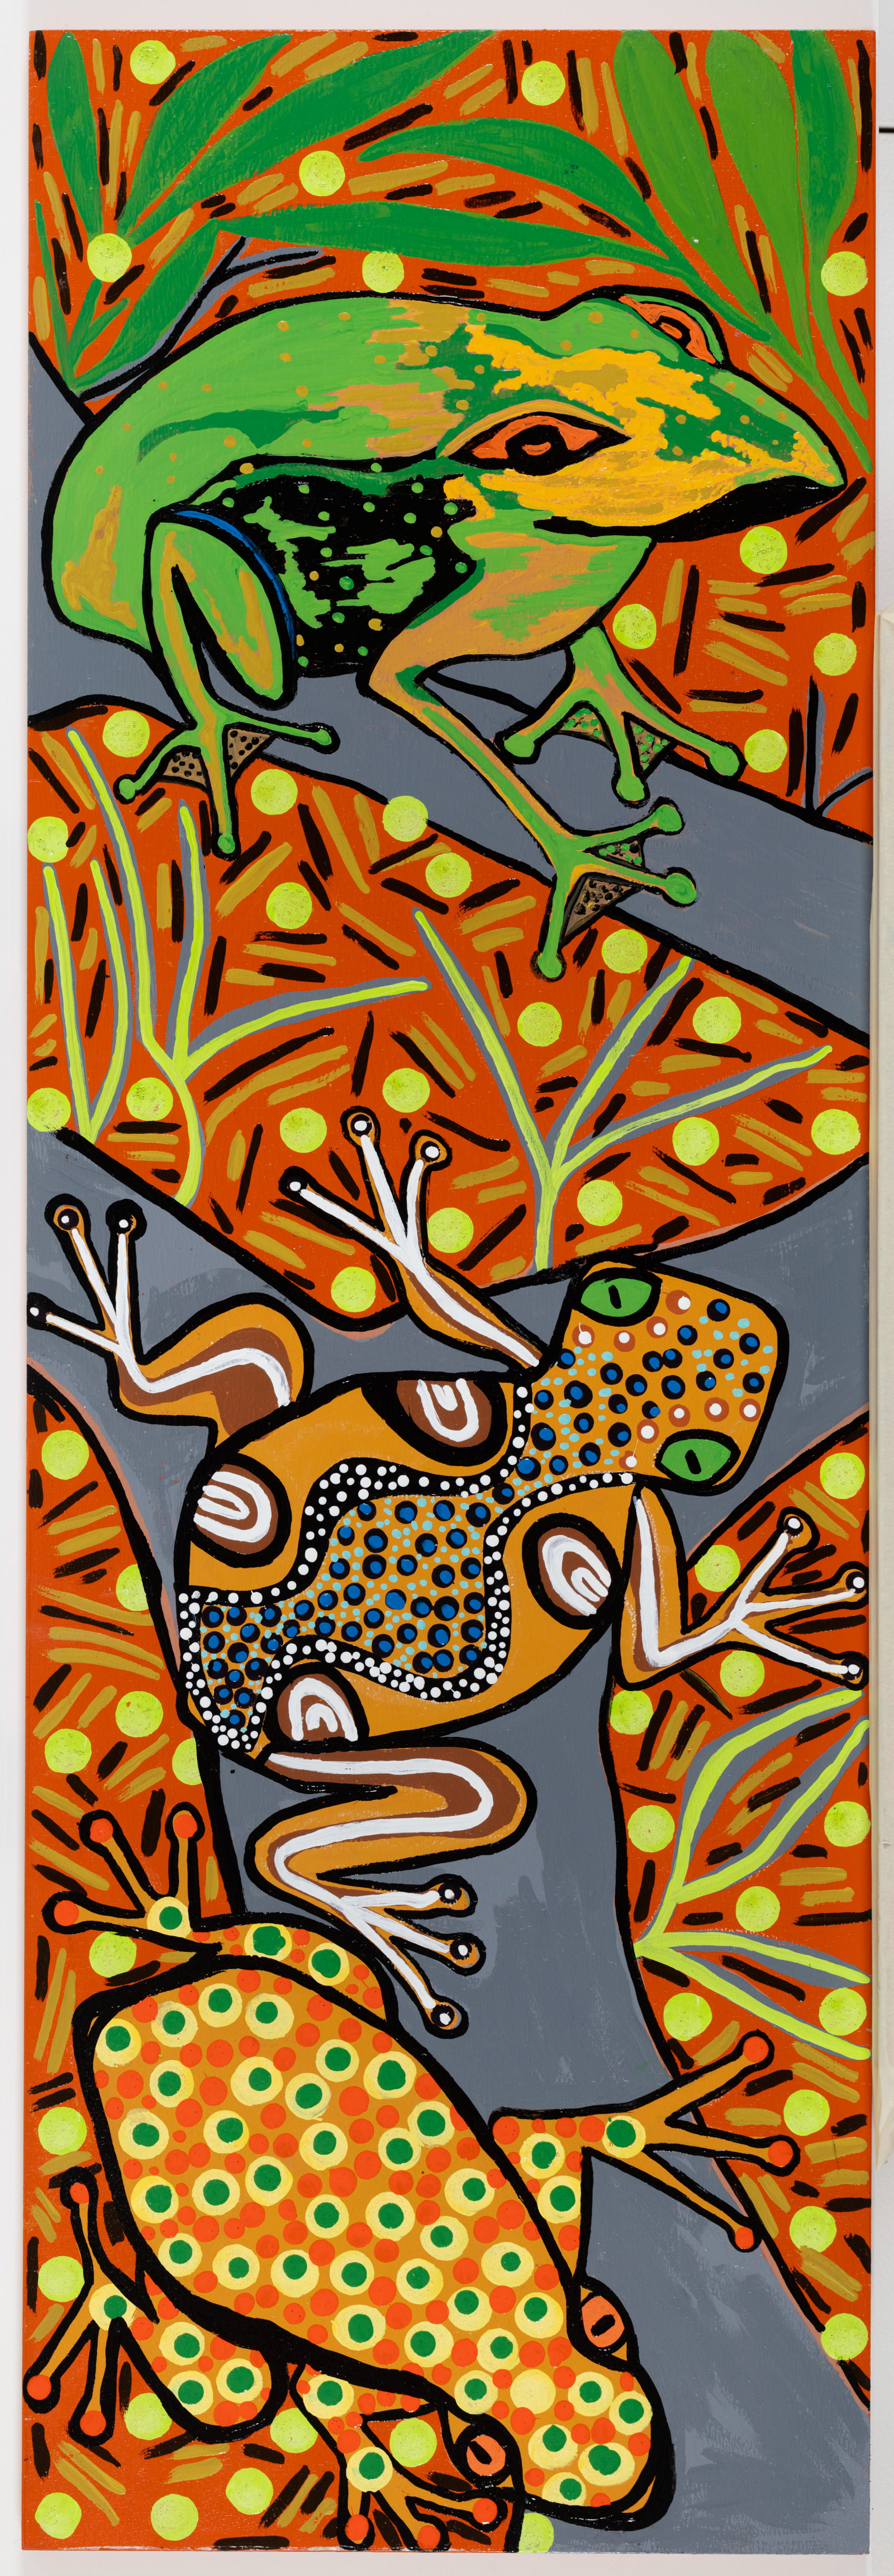 Frog Dreaming at Coomie Lagoon, Lorraine Brown and Narelle Thomas, 2022, acrylic on plywood board, 122.5cm x 41cm
At Coomie Lagoon the song of the frogs was blistering loud especially in the early days. But now you will very rarely hear one. What does that say about climate change and other environmental issues that cause change?